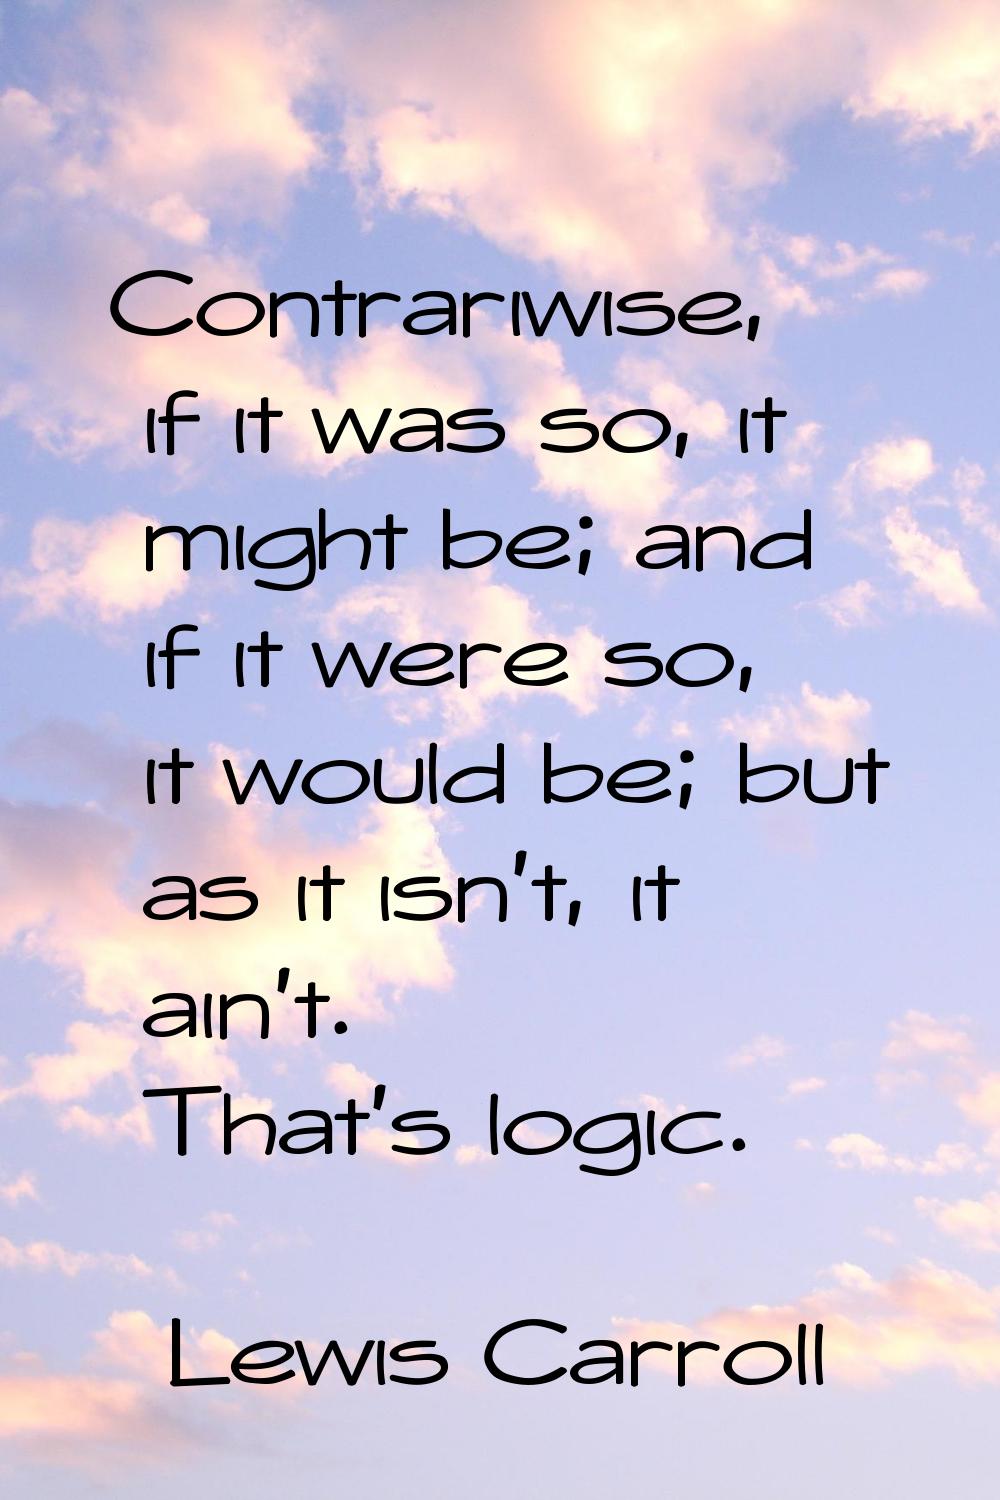 Contrariwise, if it was so, it might be; and if it were so, it would be; but as it isn't, it ain't.